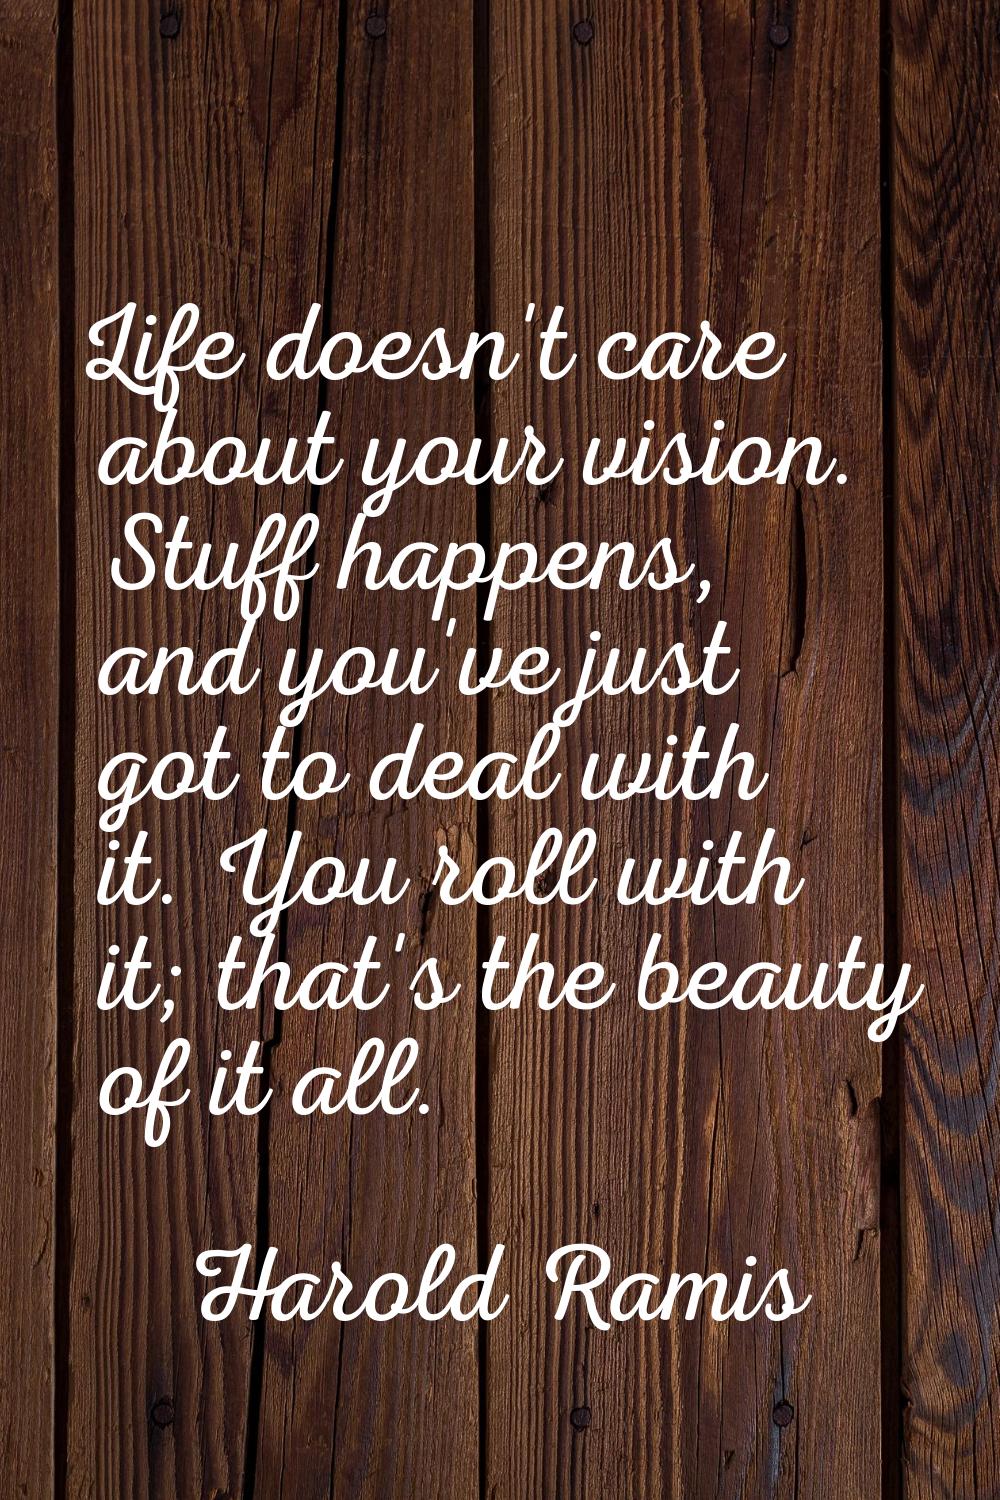 Life doesn't care about your vision. Stuff happens, and you've just got to deal with it. You roll w